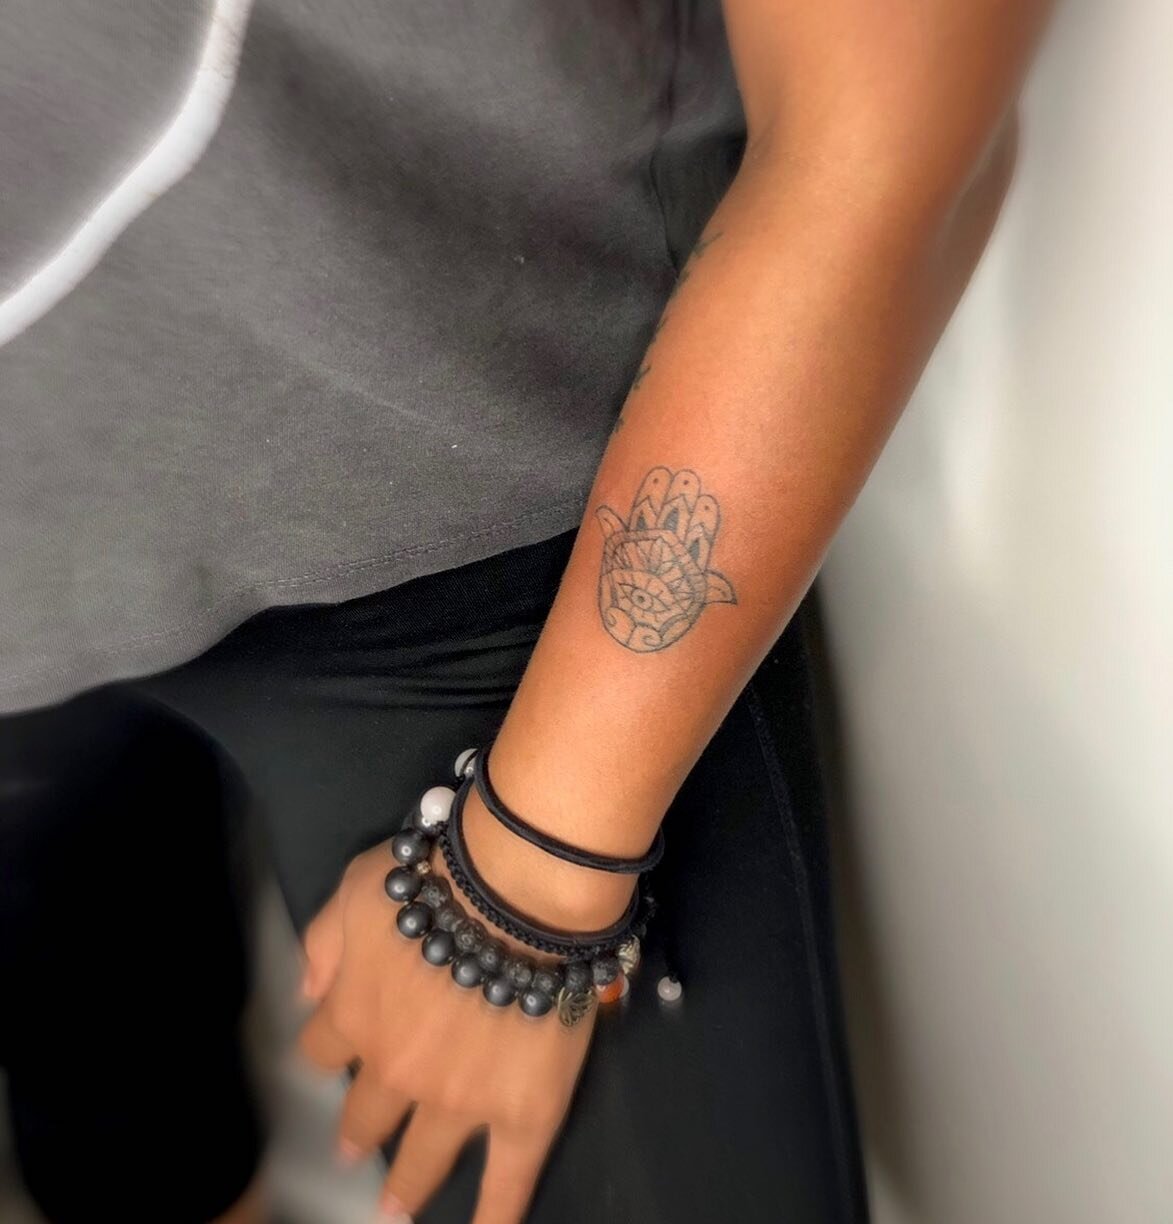 HAMSA 🧿 

The hamsa is an ancient Middle Eastern symbol that holds a variety of meanings across cultures. Nevertheless, it is regarded in all faiths as a protective talisman that brings good fortune, health and happiness. The hamsa is primarily used